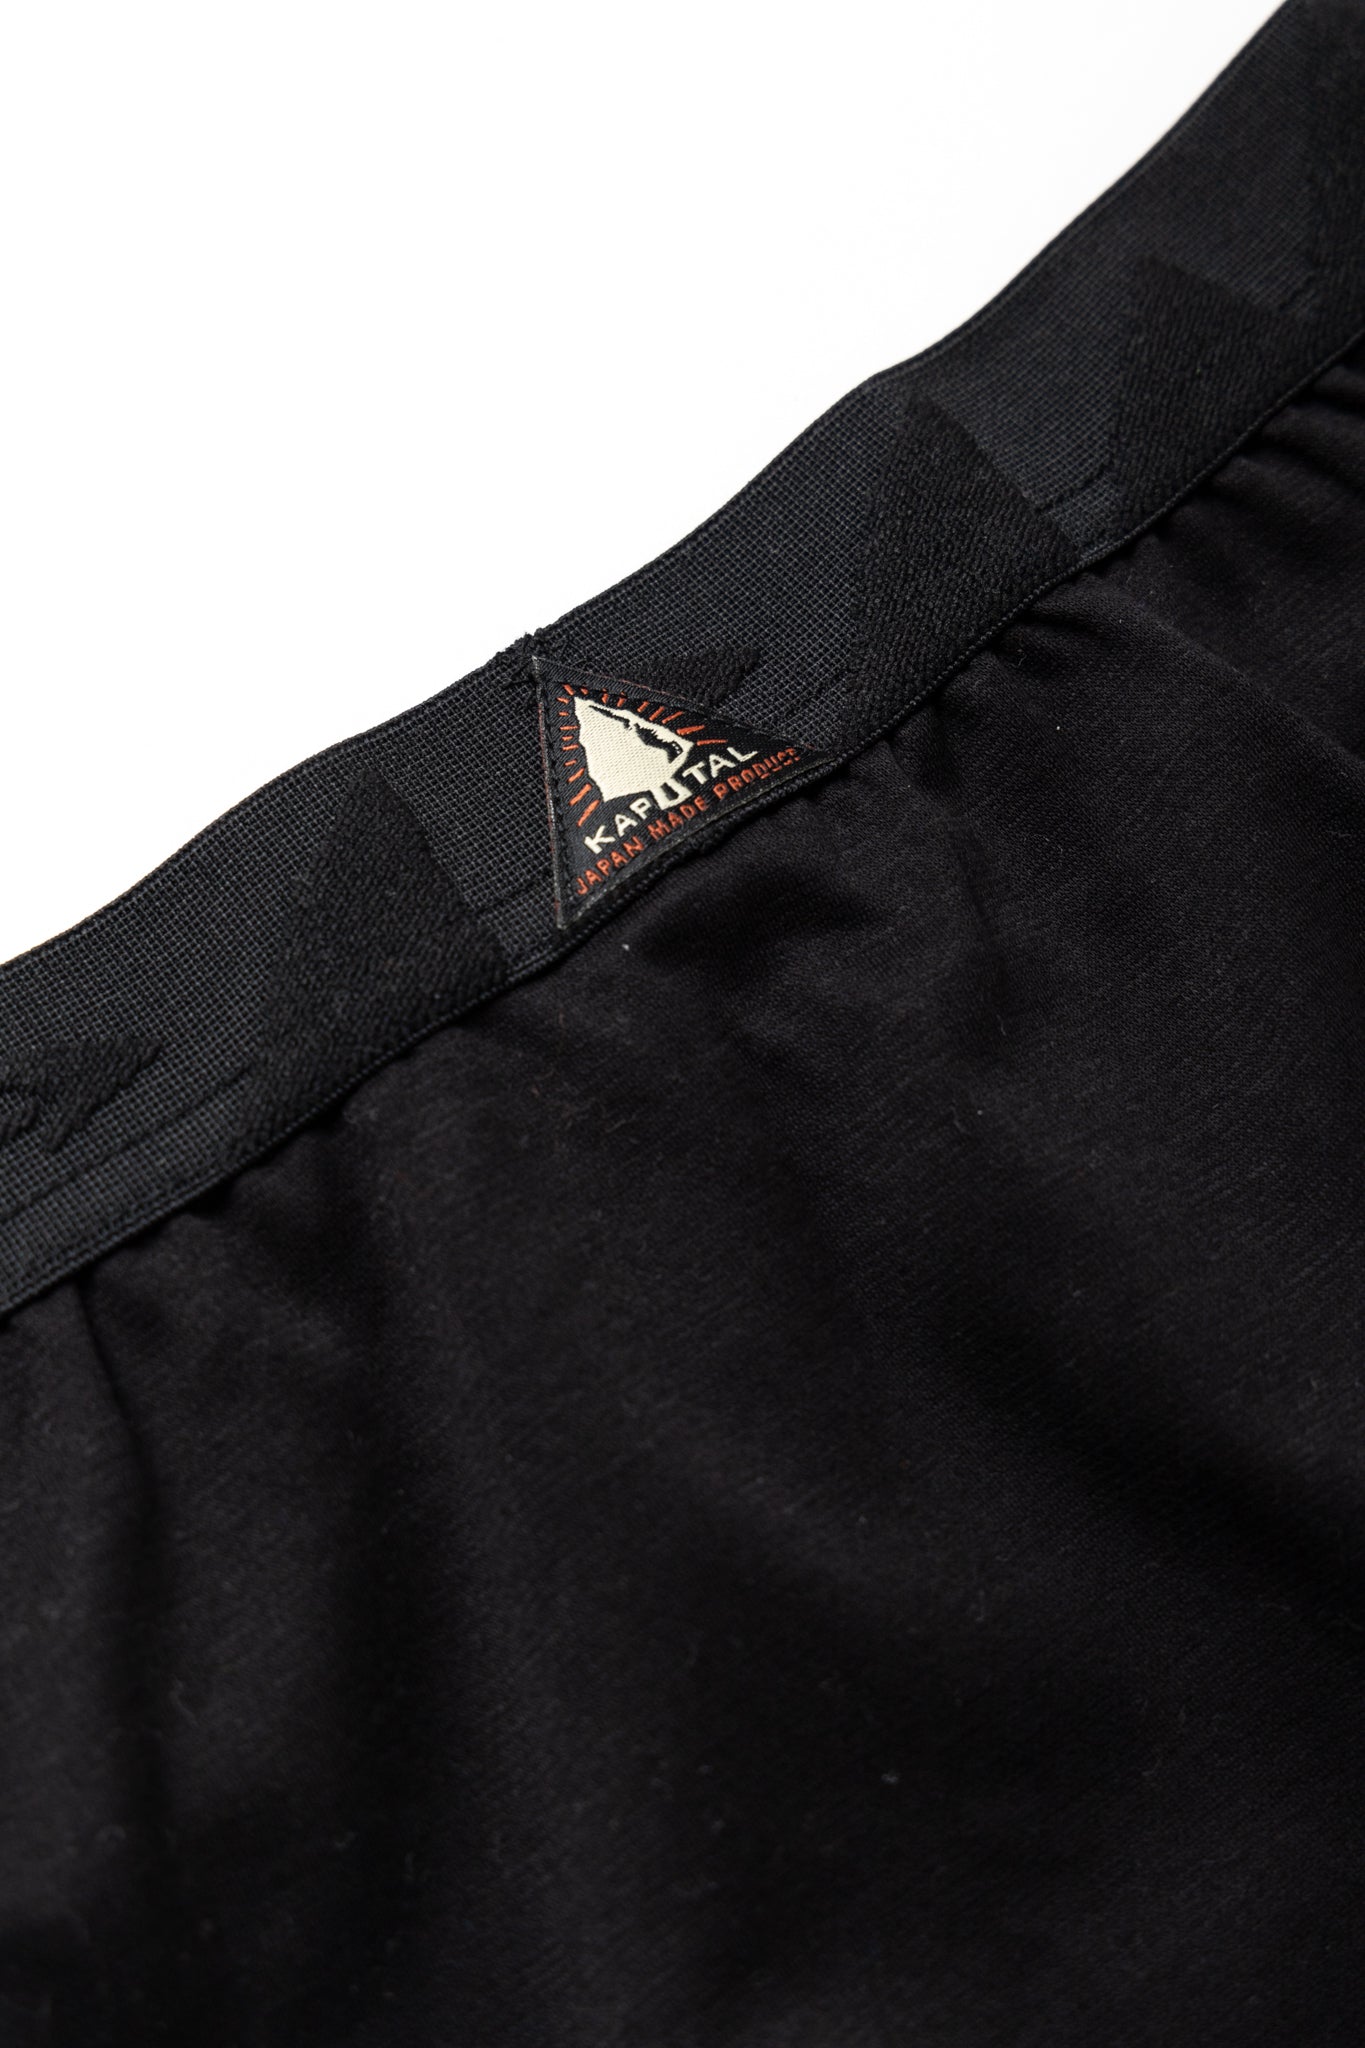 Kapital Trunks made of thick and stretchy cotton fabric. Made in Japan.